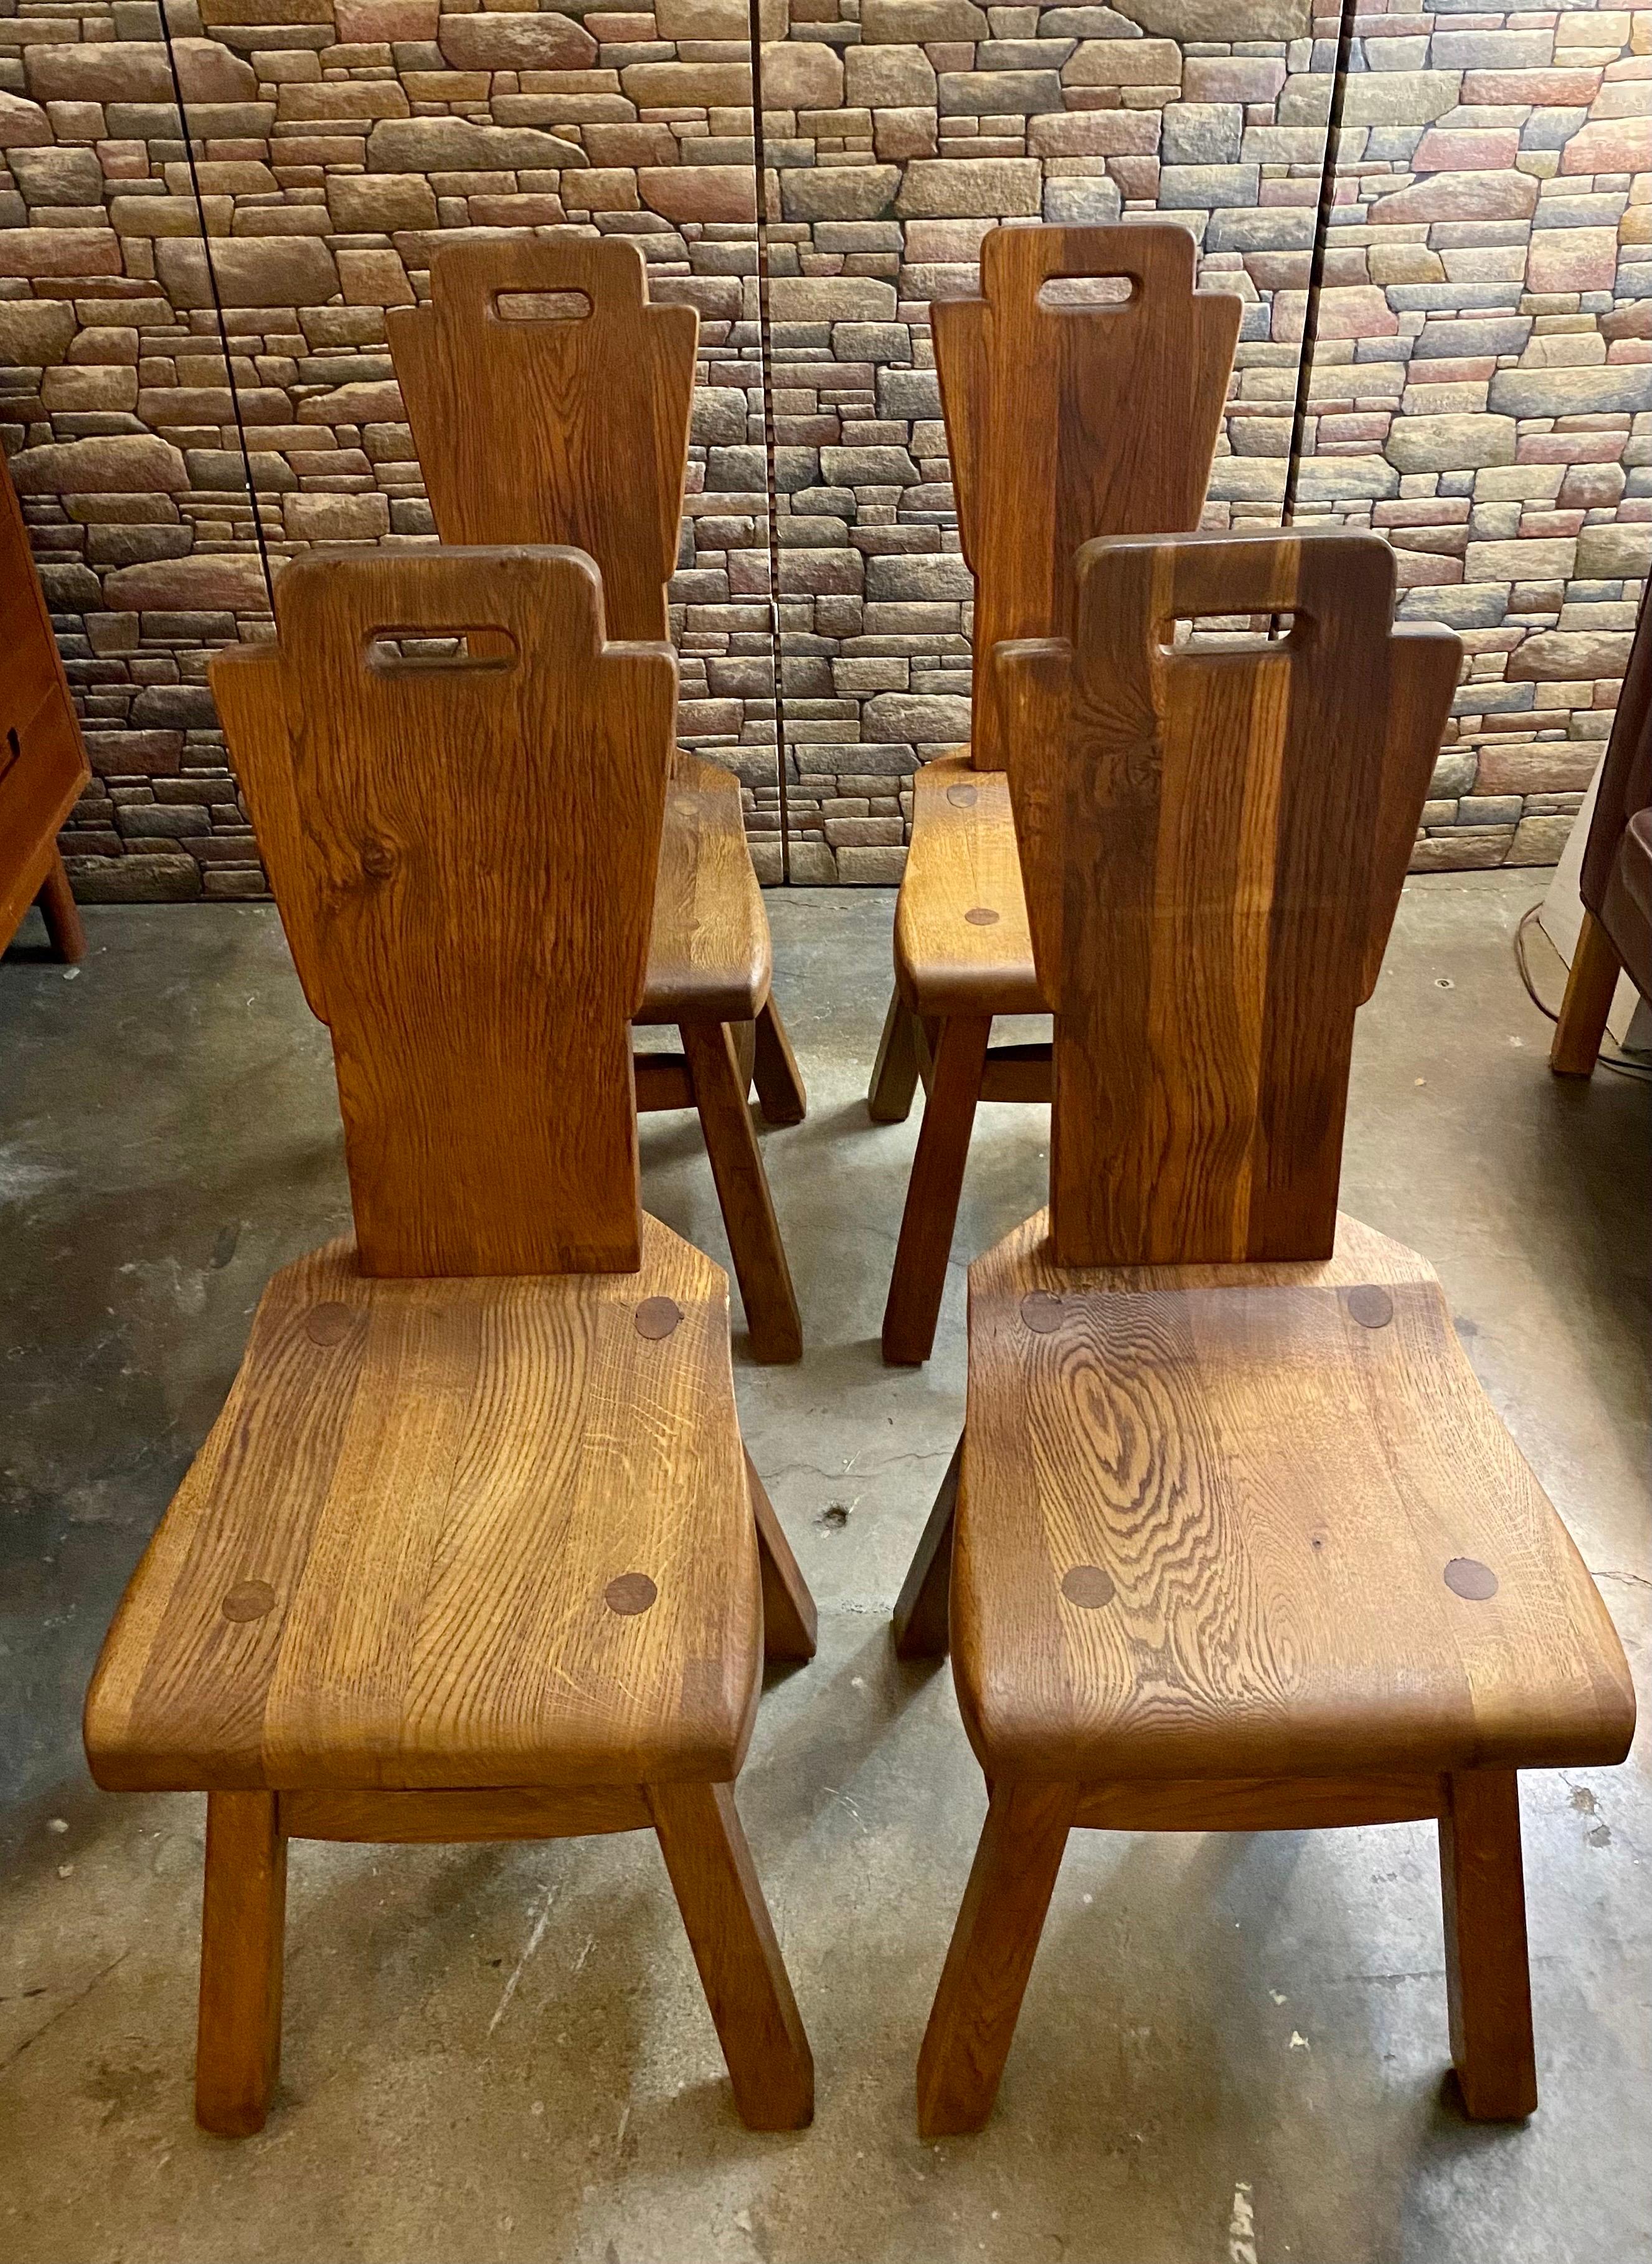 Set of 4 brutalist dutch dining chairs, circa 1970s made of solid oak, thick, heavy, sturdy, and in good overall condition; age-appropriate wear to the wood. The wood is a beautiful rich brown color. 
Dimensions: 15